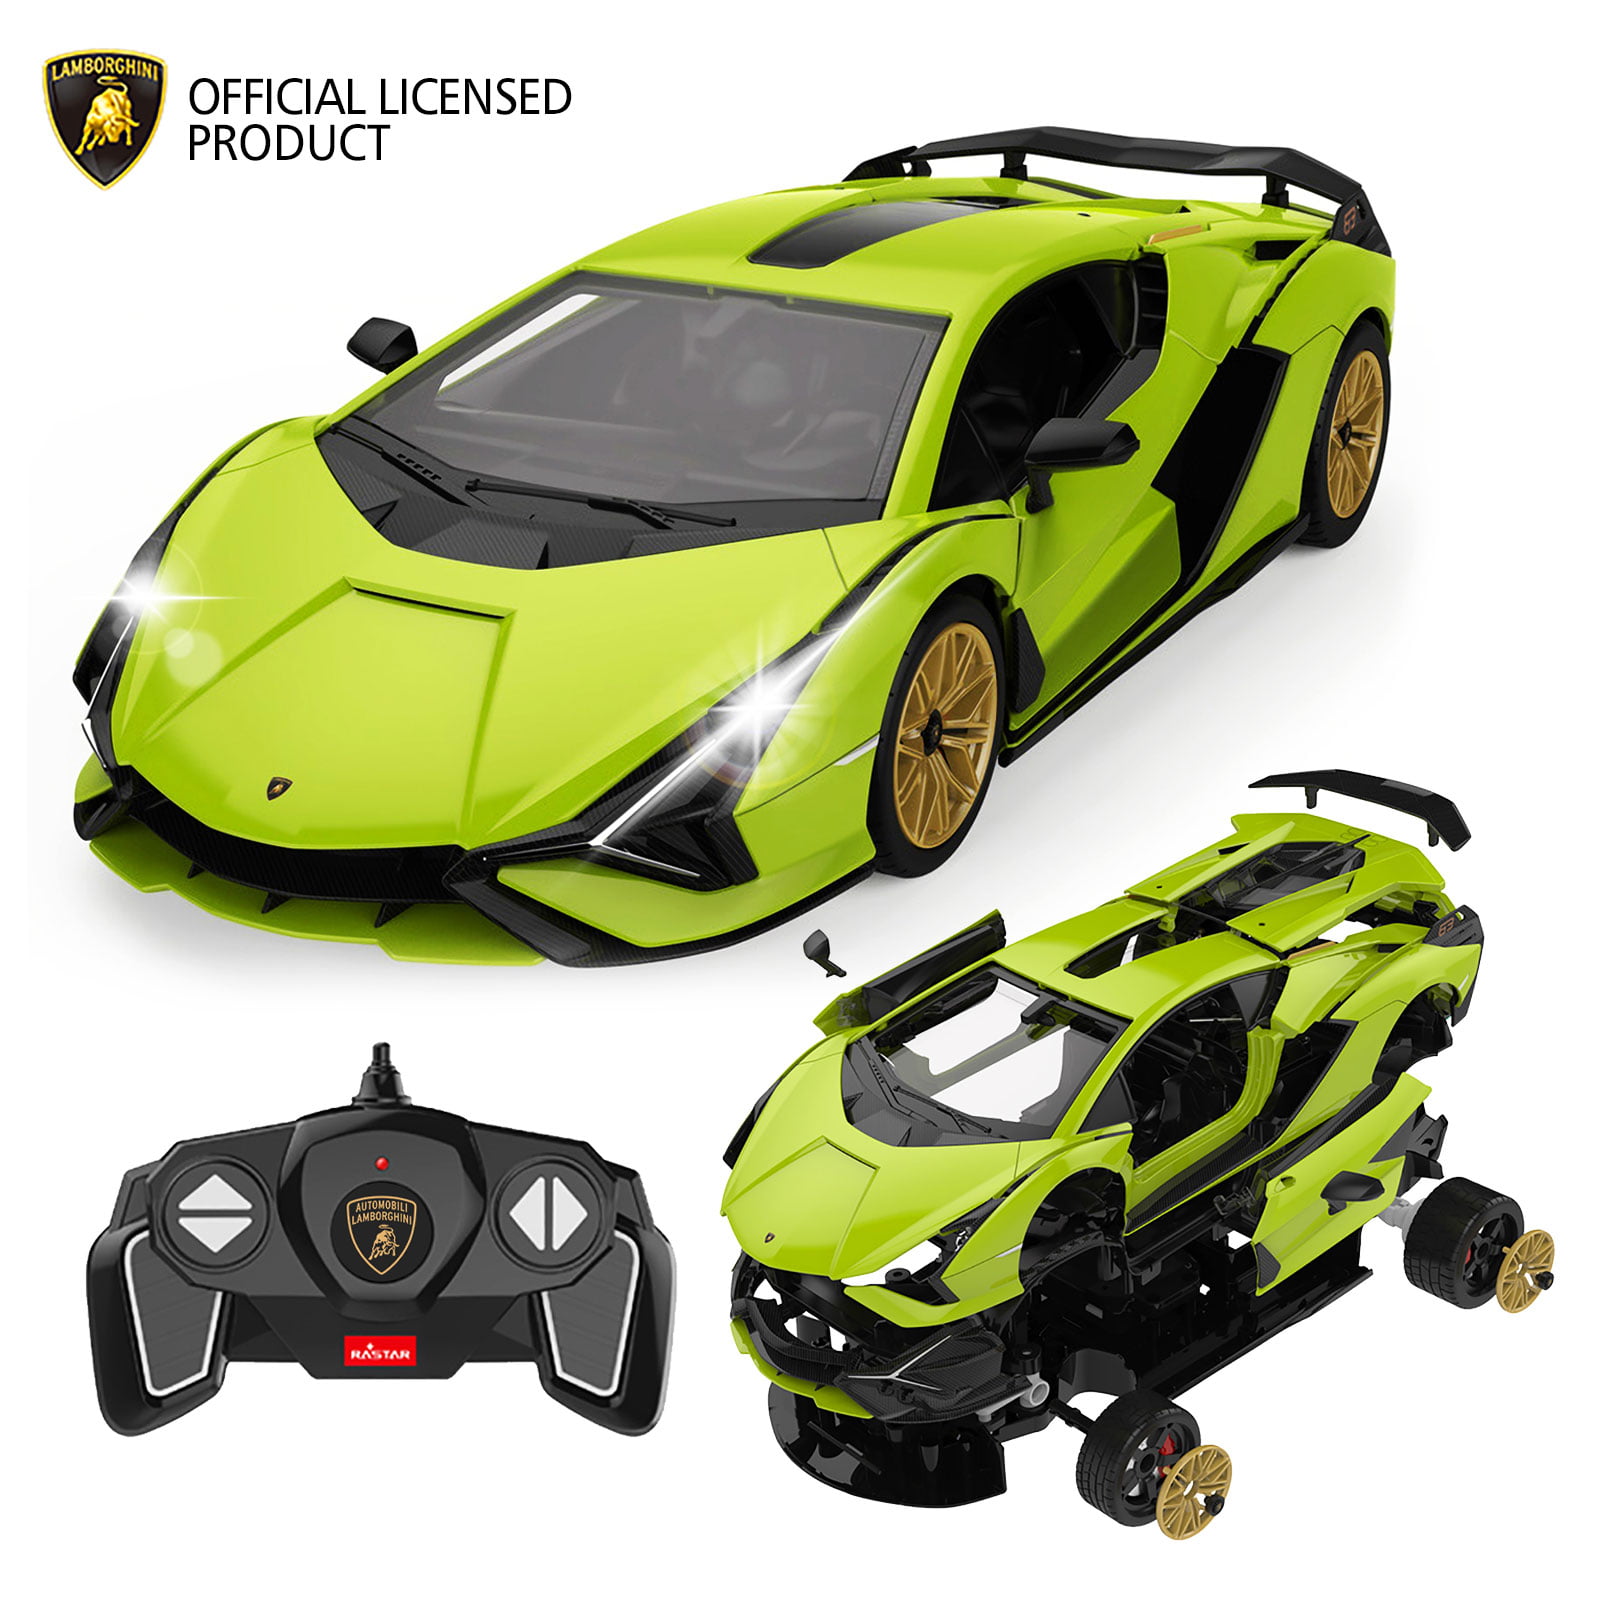 GotechoD Remote Control Car 1:18 RC Cars for Kids 2.4Ghz High Speed Racing Car Rechargeable Electronic Hobby Car Toys for 6,7,8-16 Year Old Boys Girls Adults Gifts Blue 